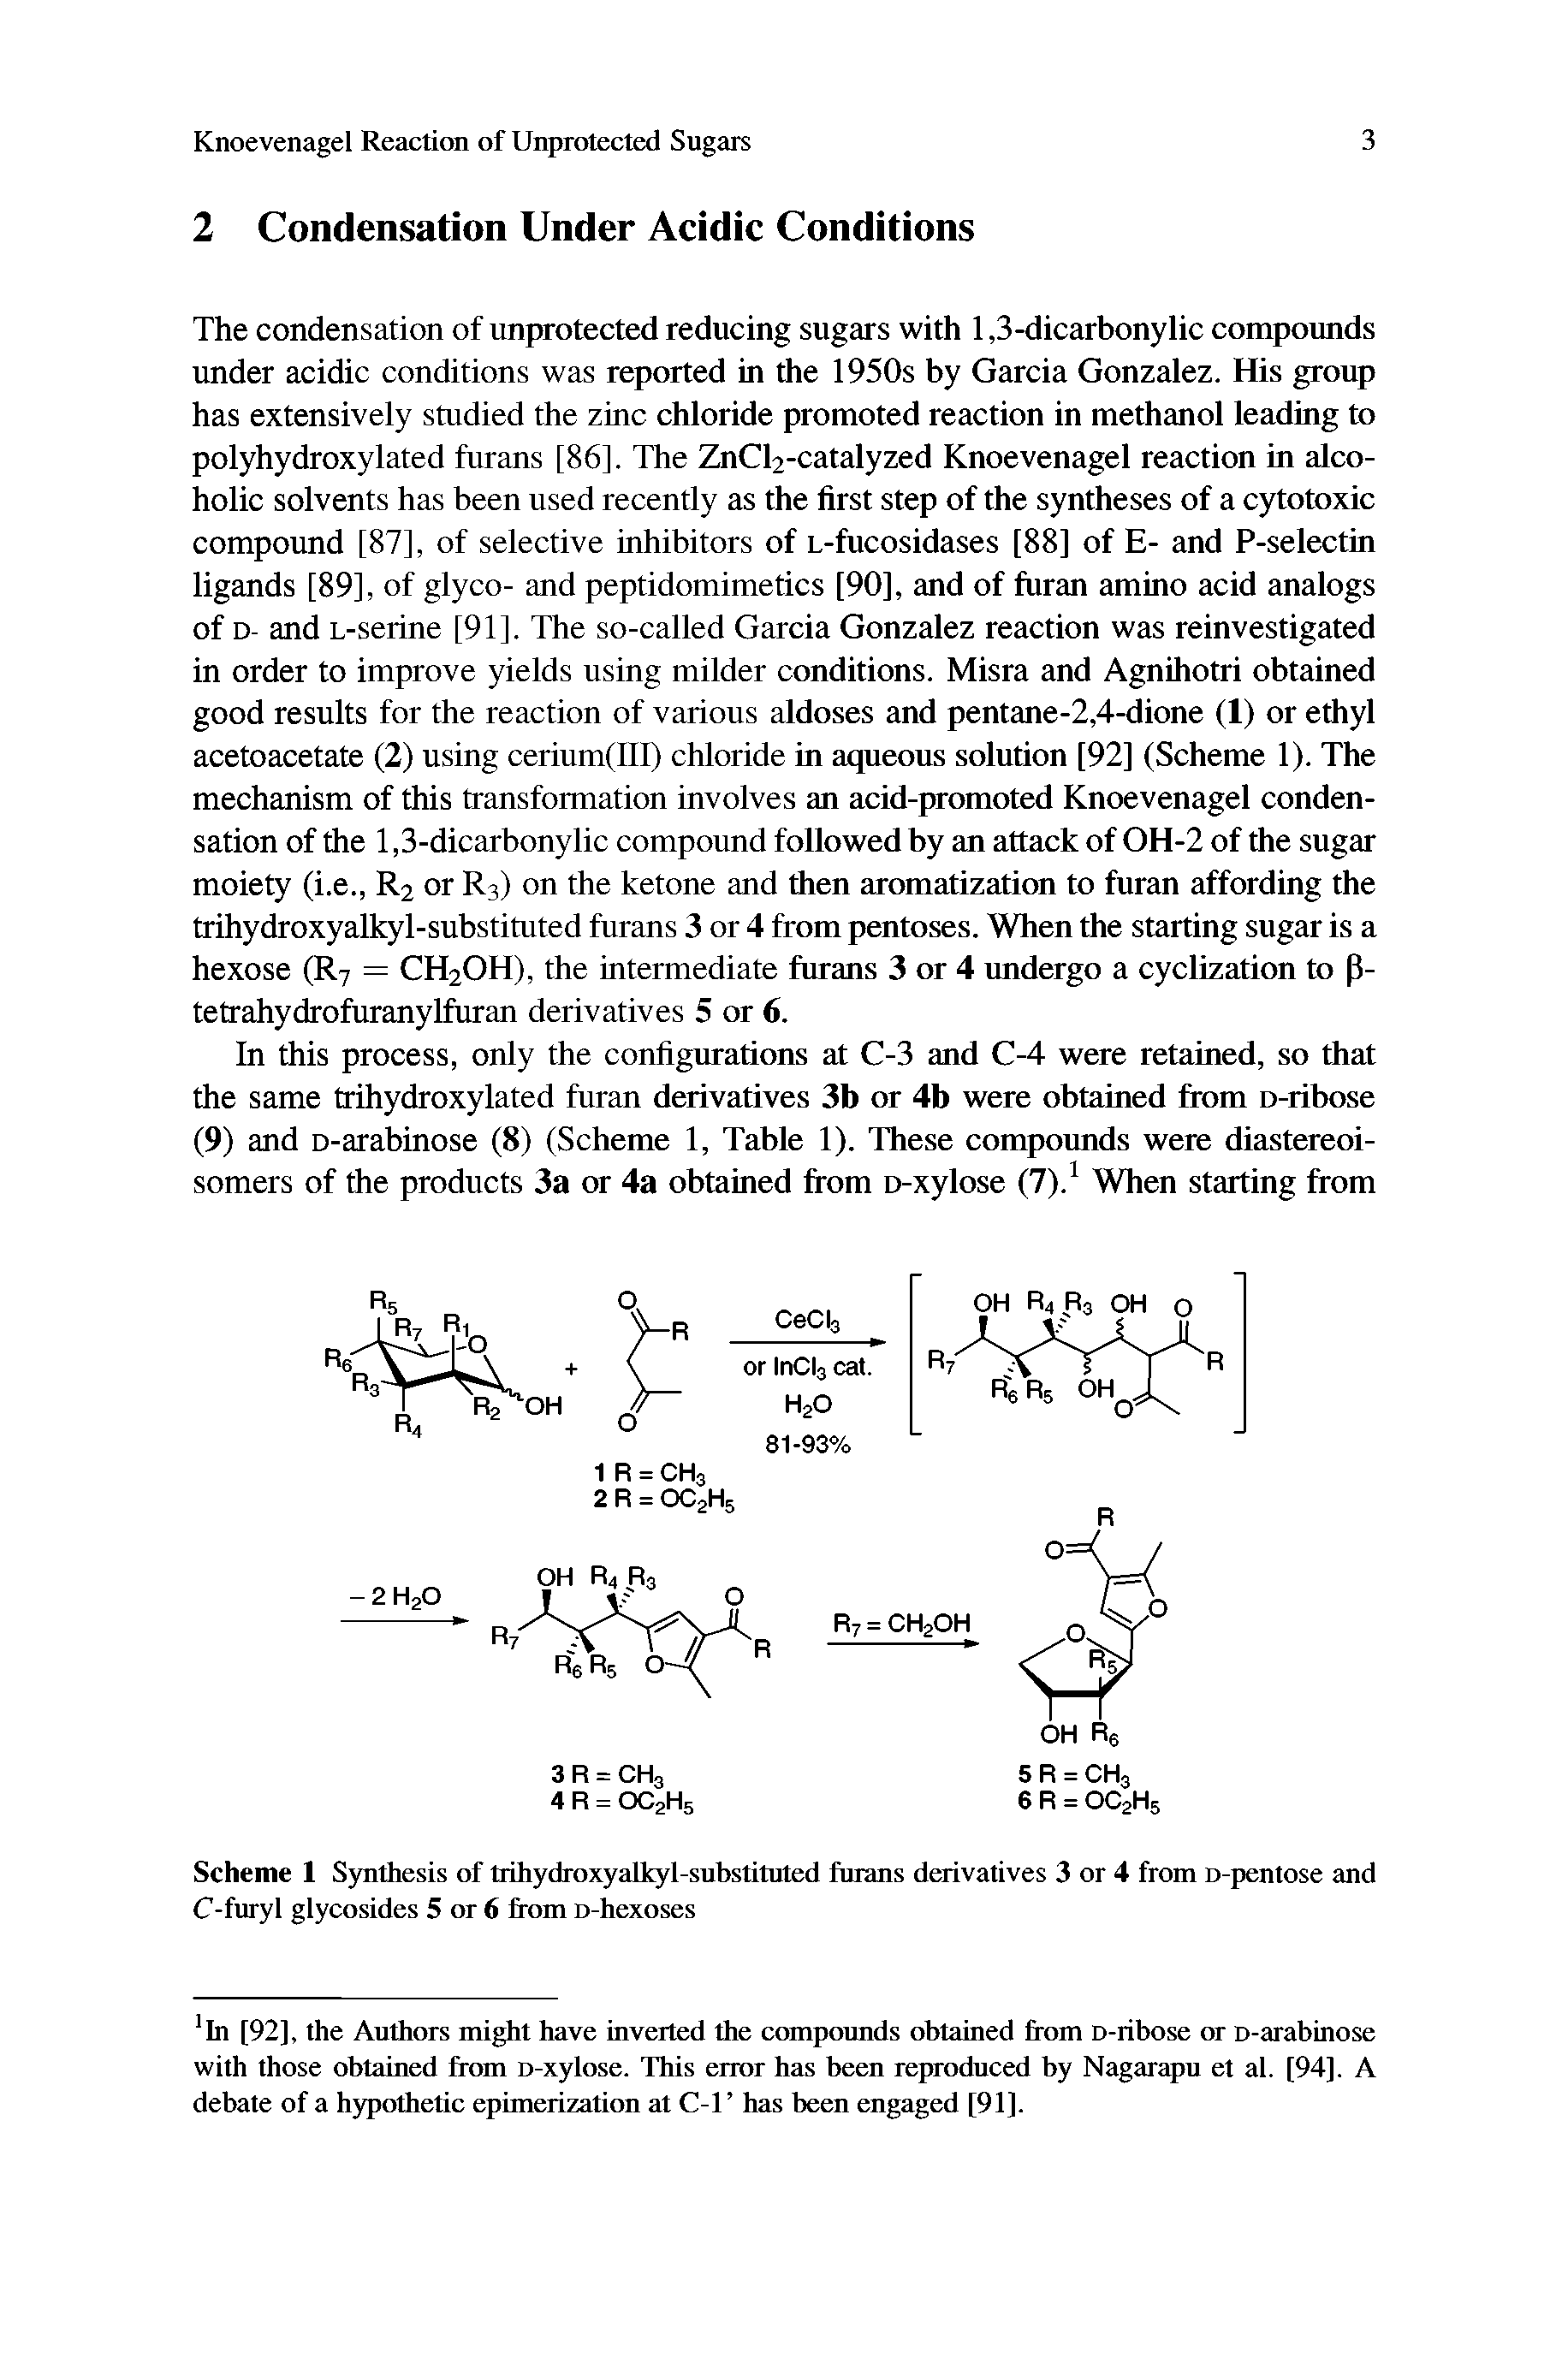 Scheme 1 Synthesis of trihydroxyalkyl-substituted furans derivatives 3 or 4 from D-pentose and C-furyl glycosides 5 or 6 from D-hexoses...